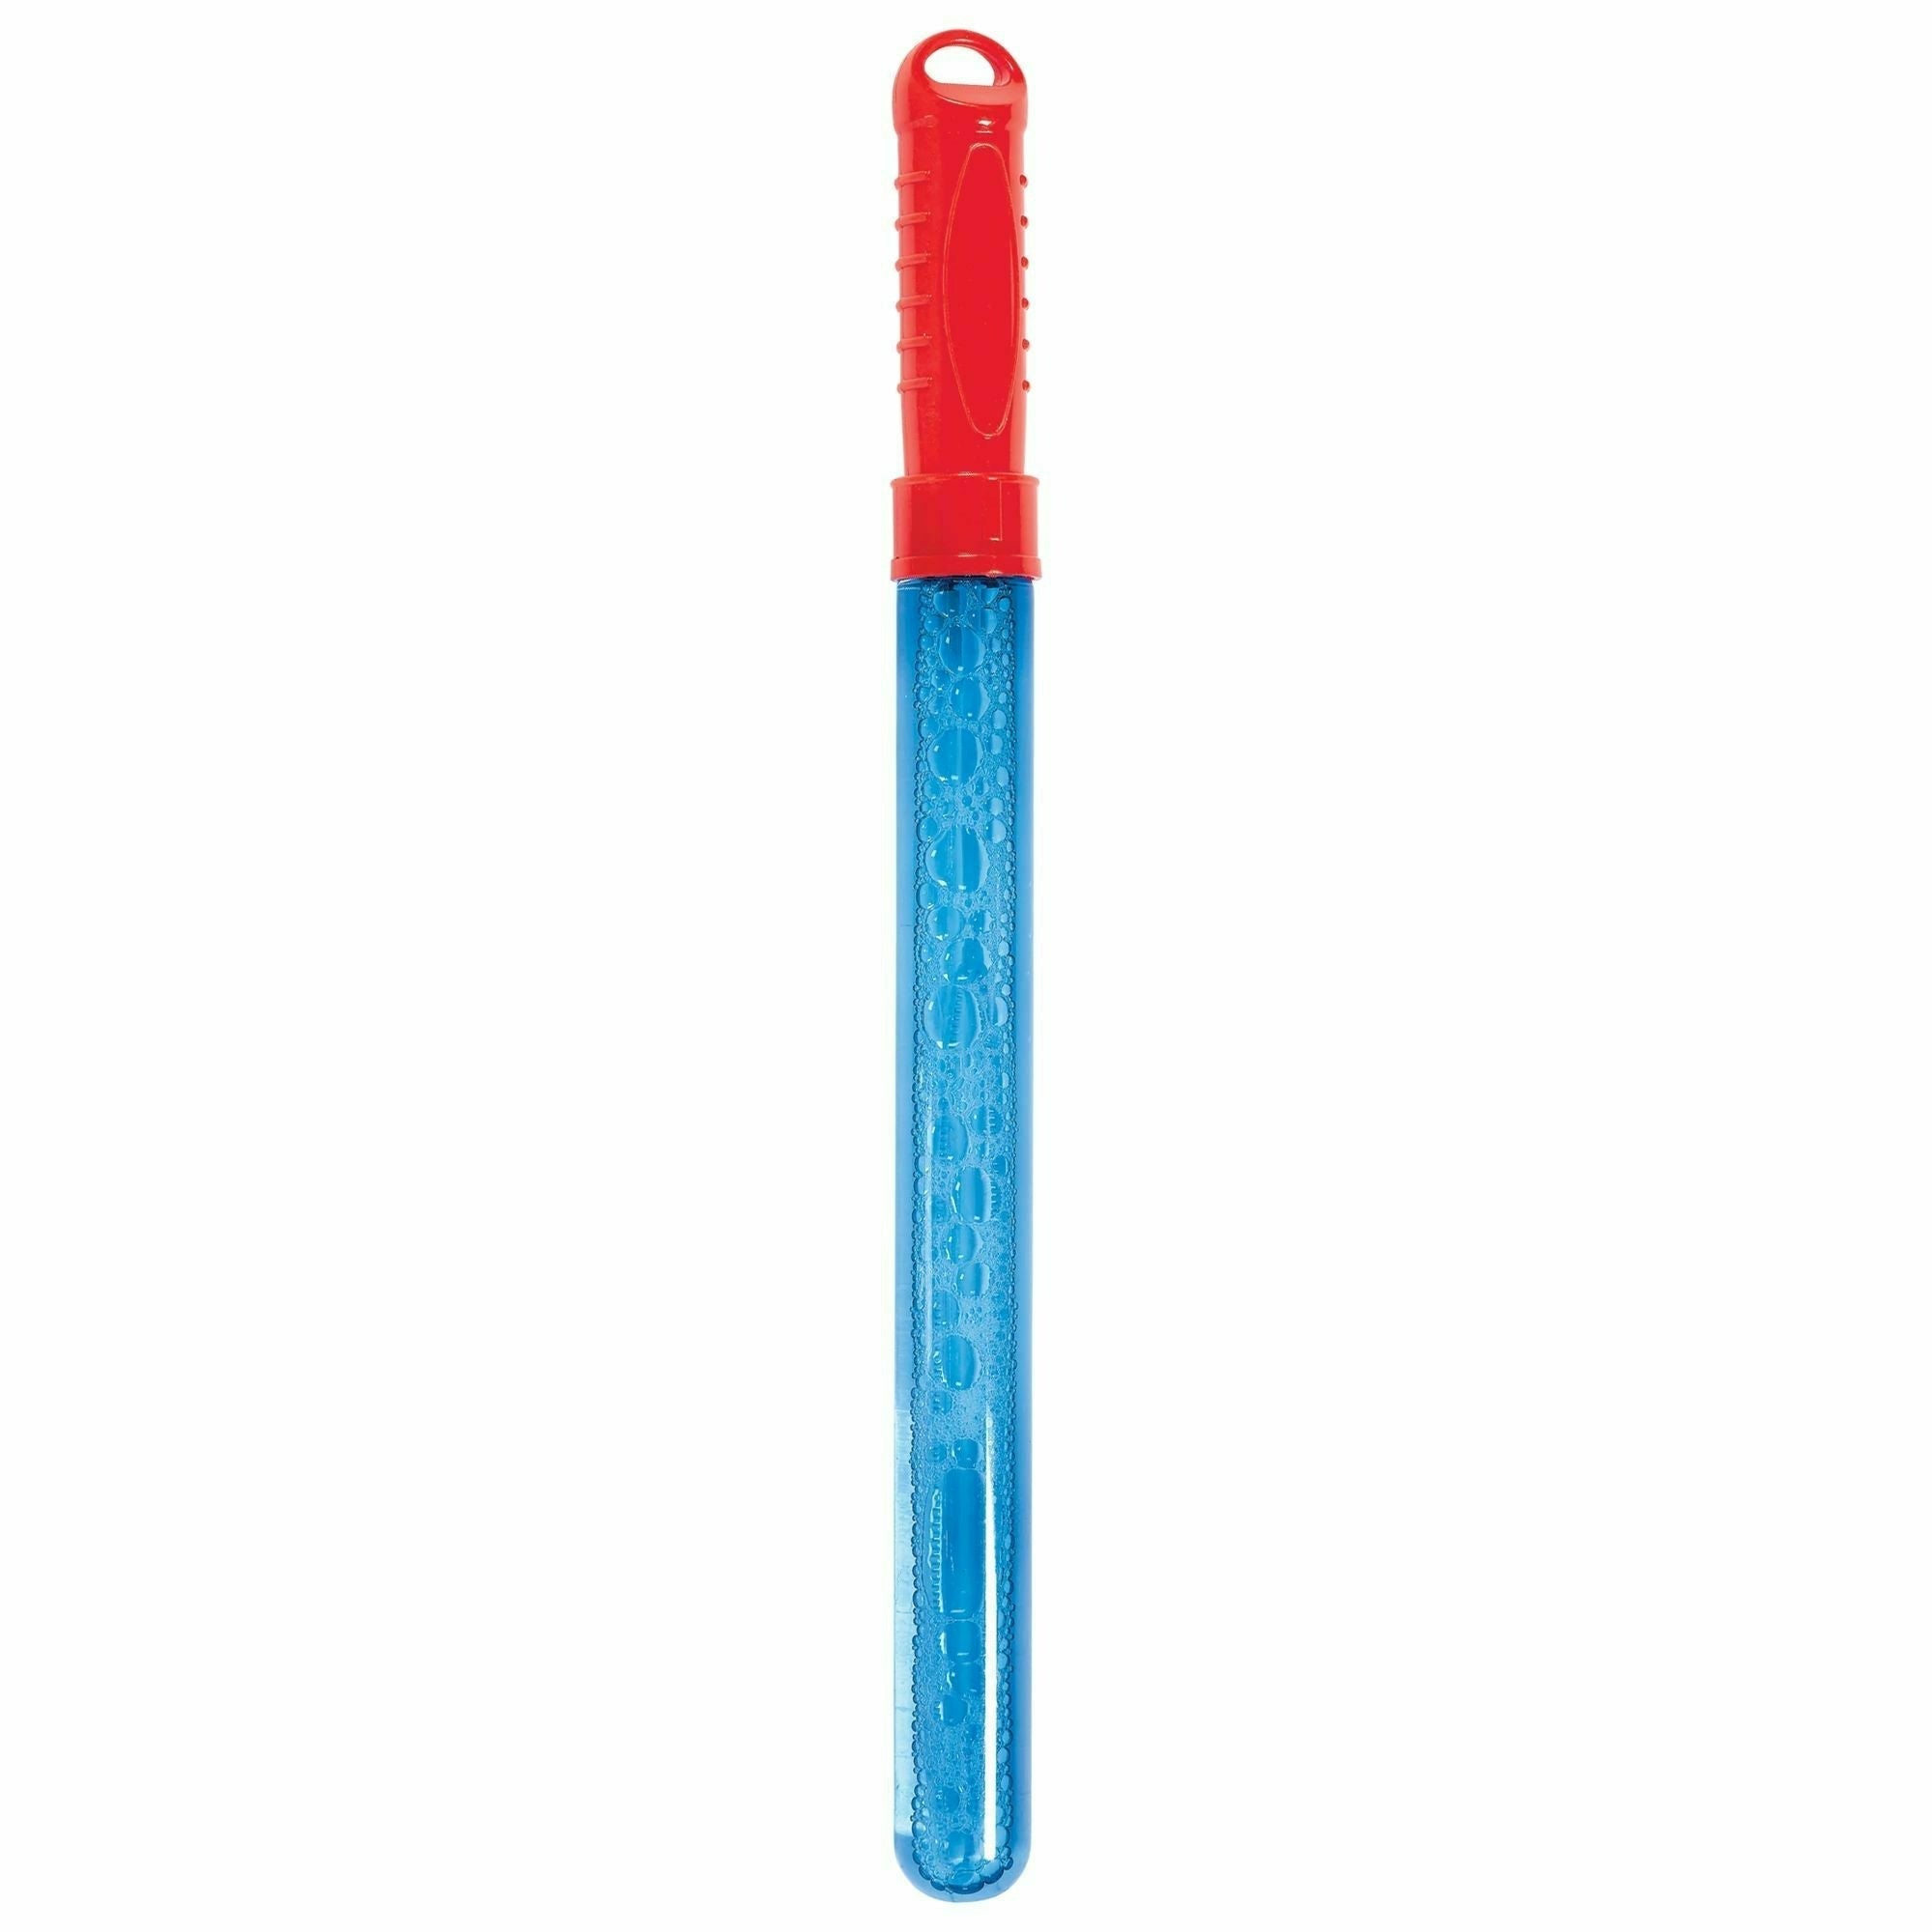 Amscan TOYS Bubble Wand Favor - Red/Blue